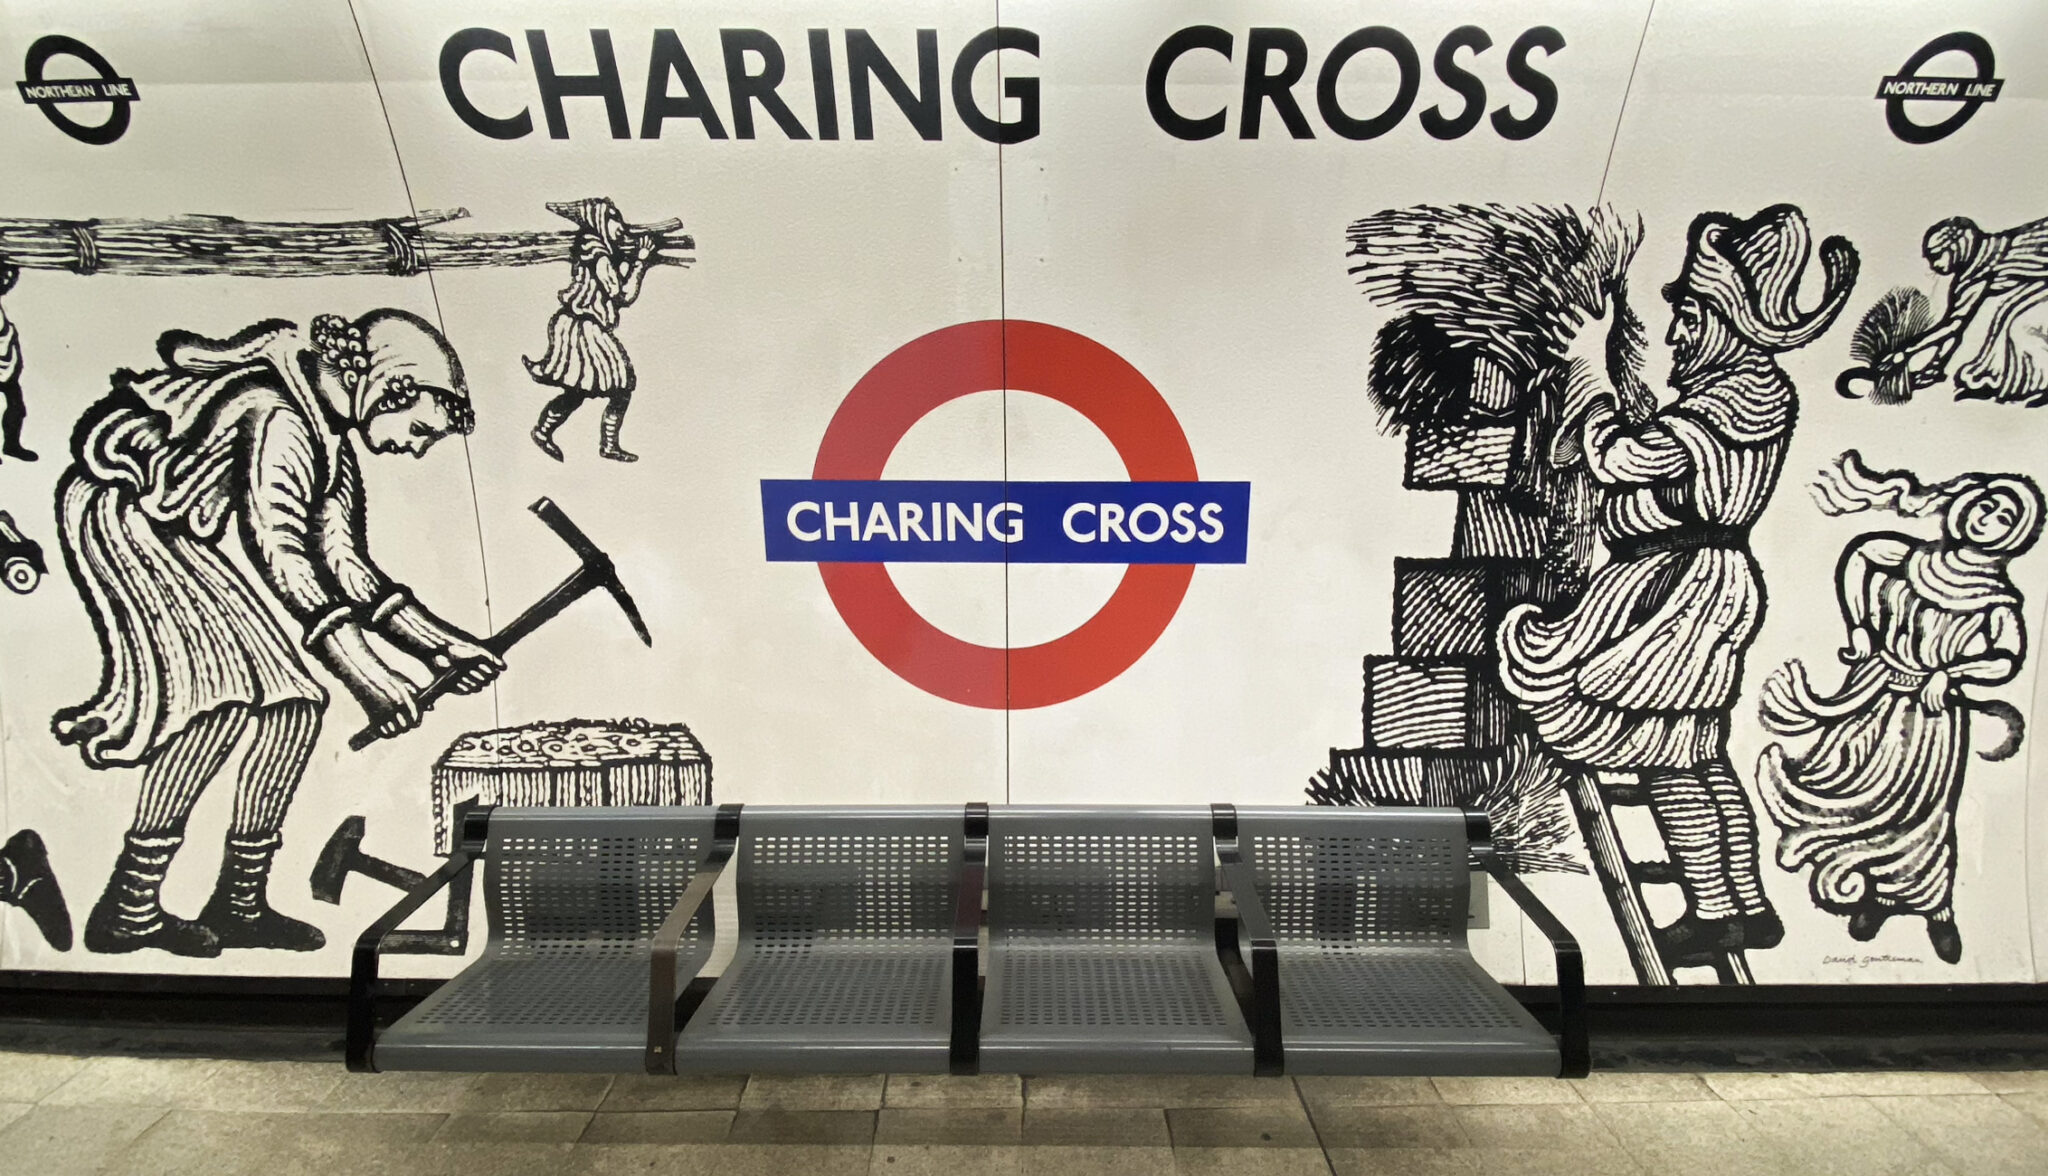 A section of a subway station wall at Charing Cross features black and white historical illustrations, a red and blue roundel with "Charing Cross" in the center, and three perforated metal benches in the foreground.